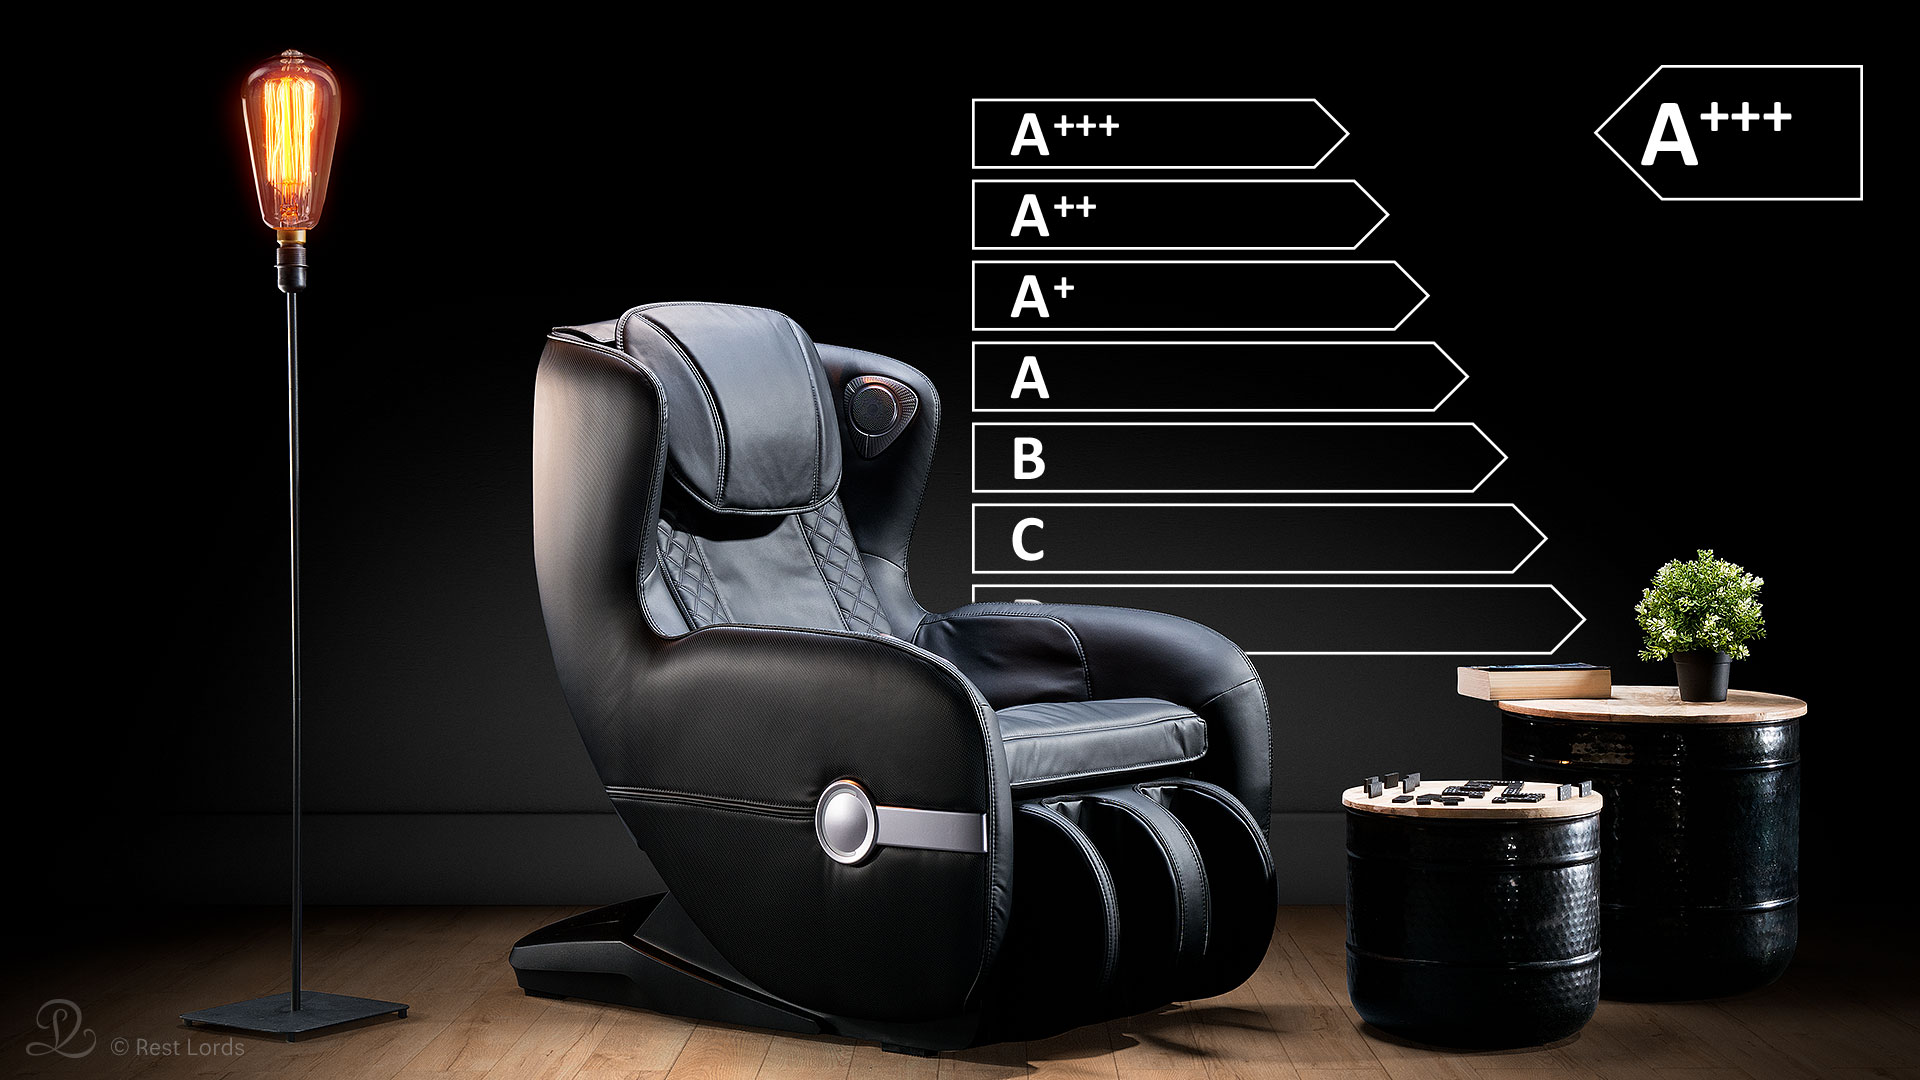 Are massage chairs energy-efficient?